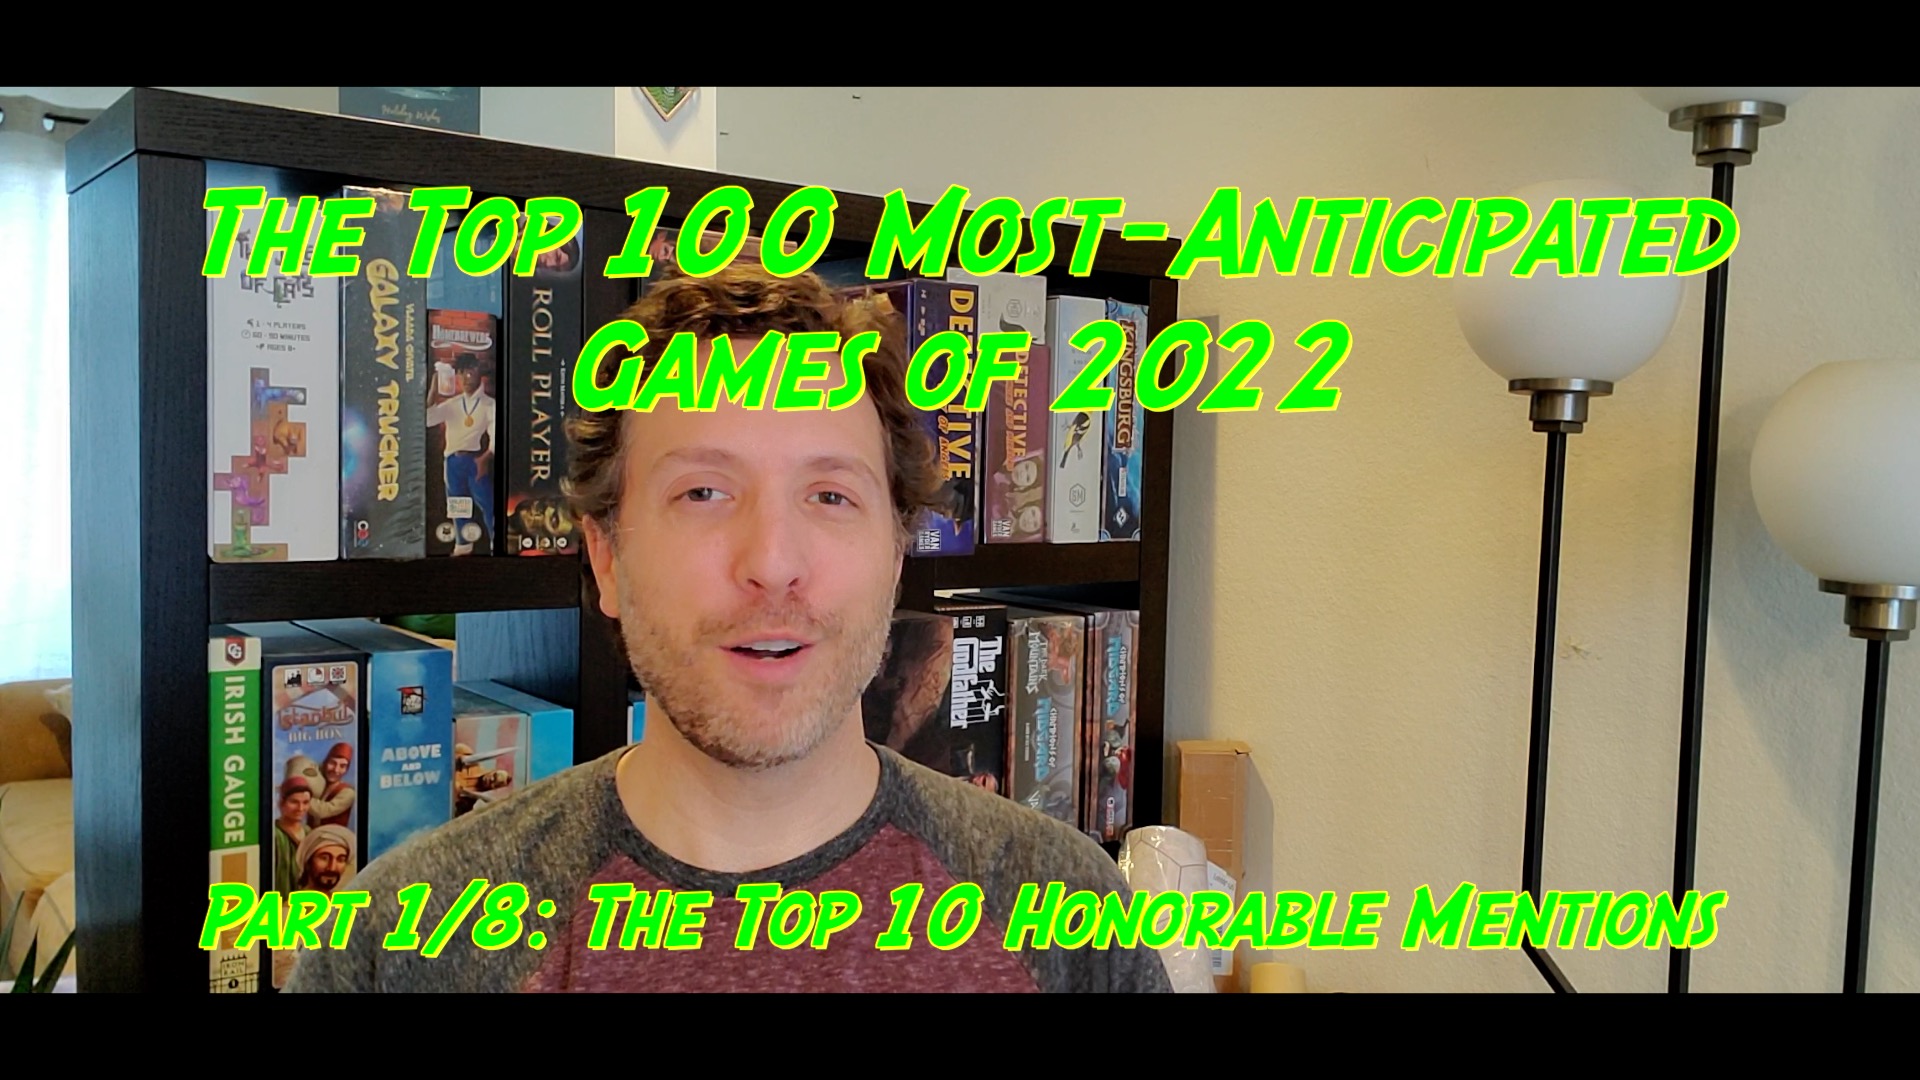 The Top 100 Most-Anticipated Games of 2022, Part 1/8: The Top 10 Honorable Mentions